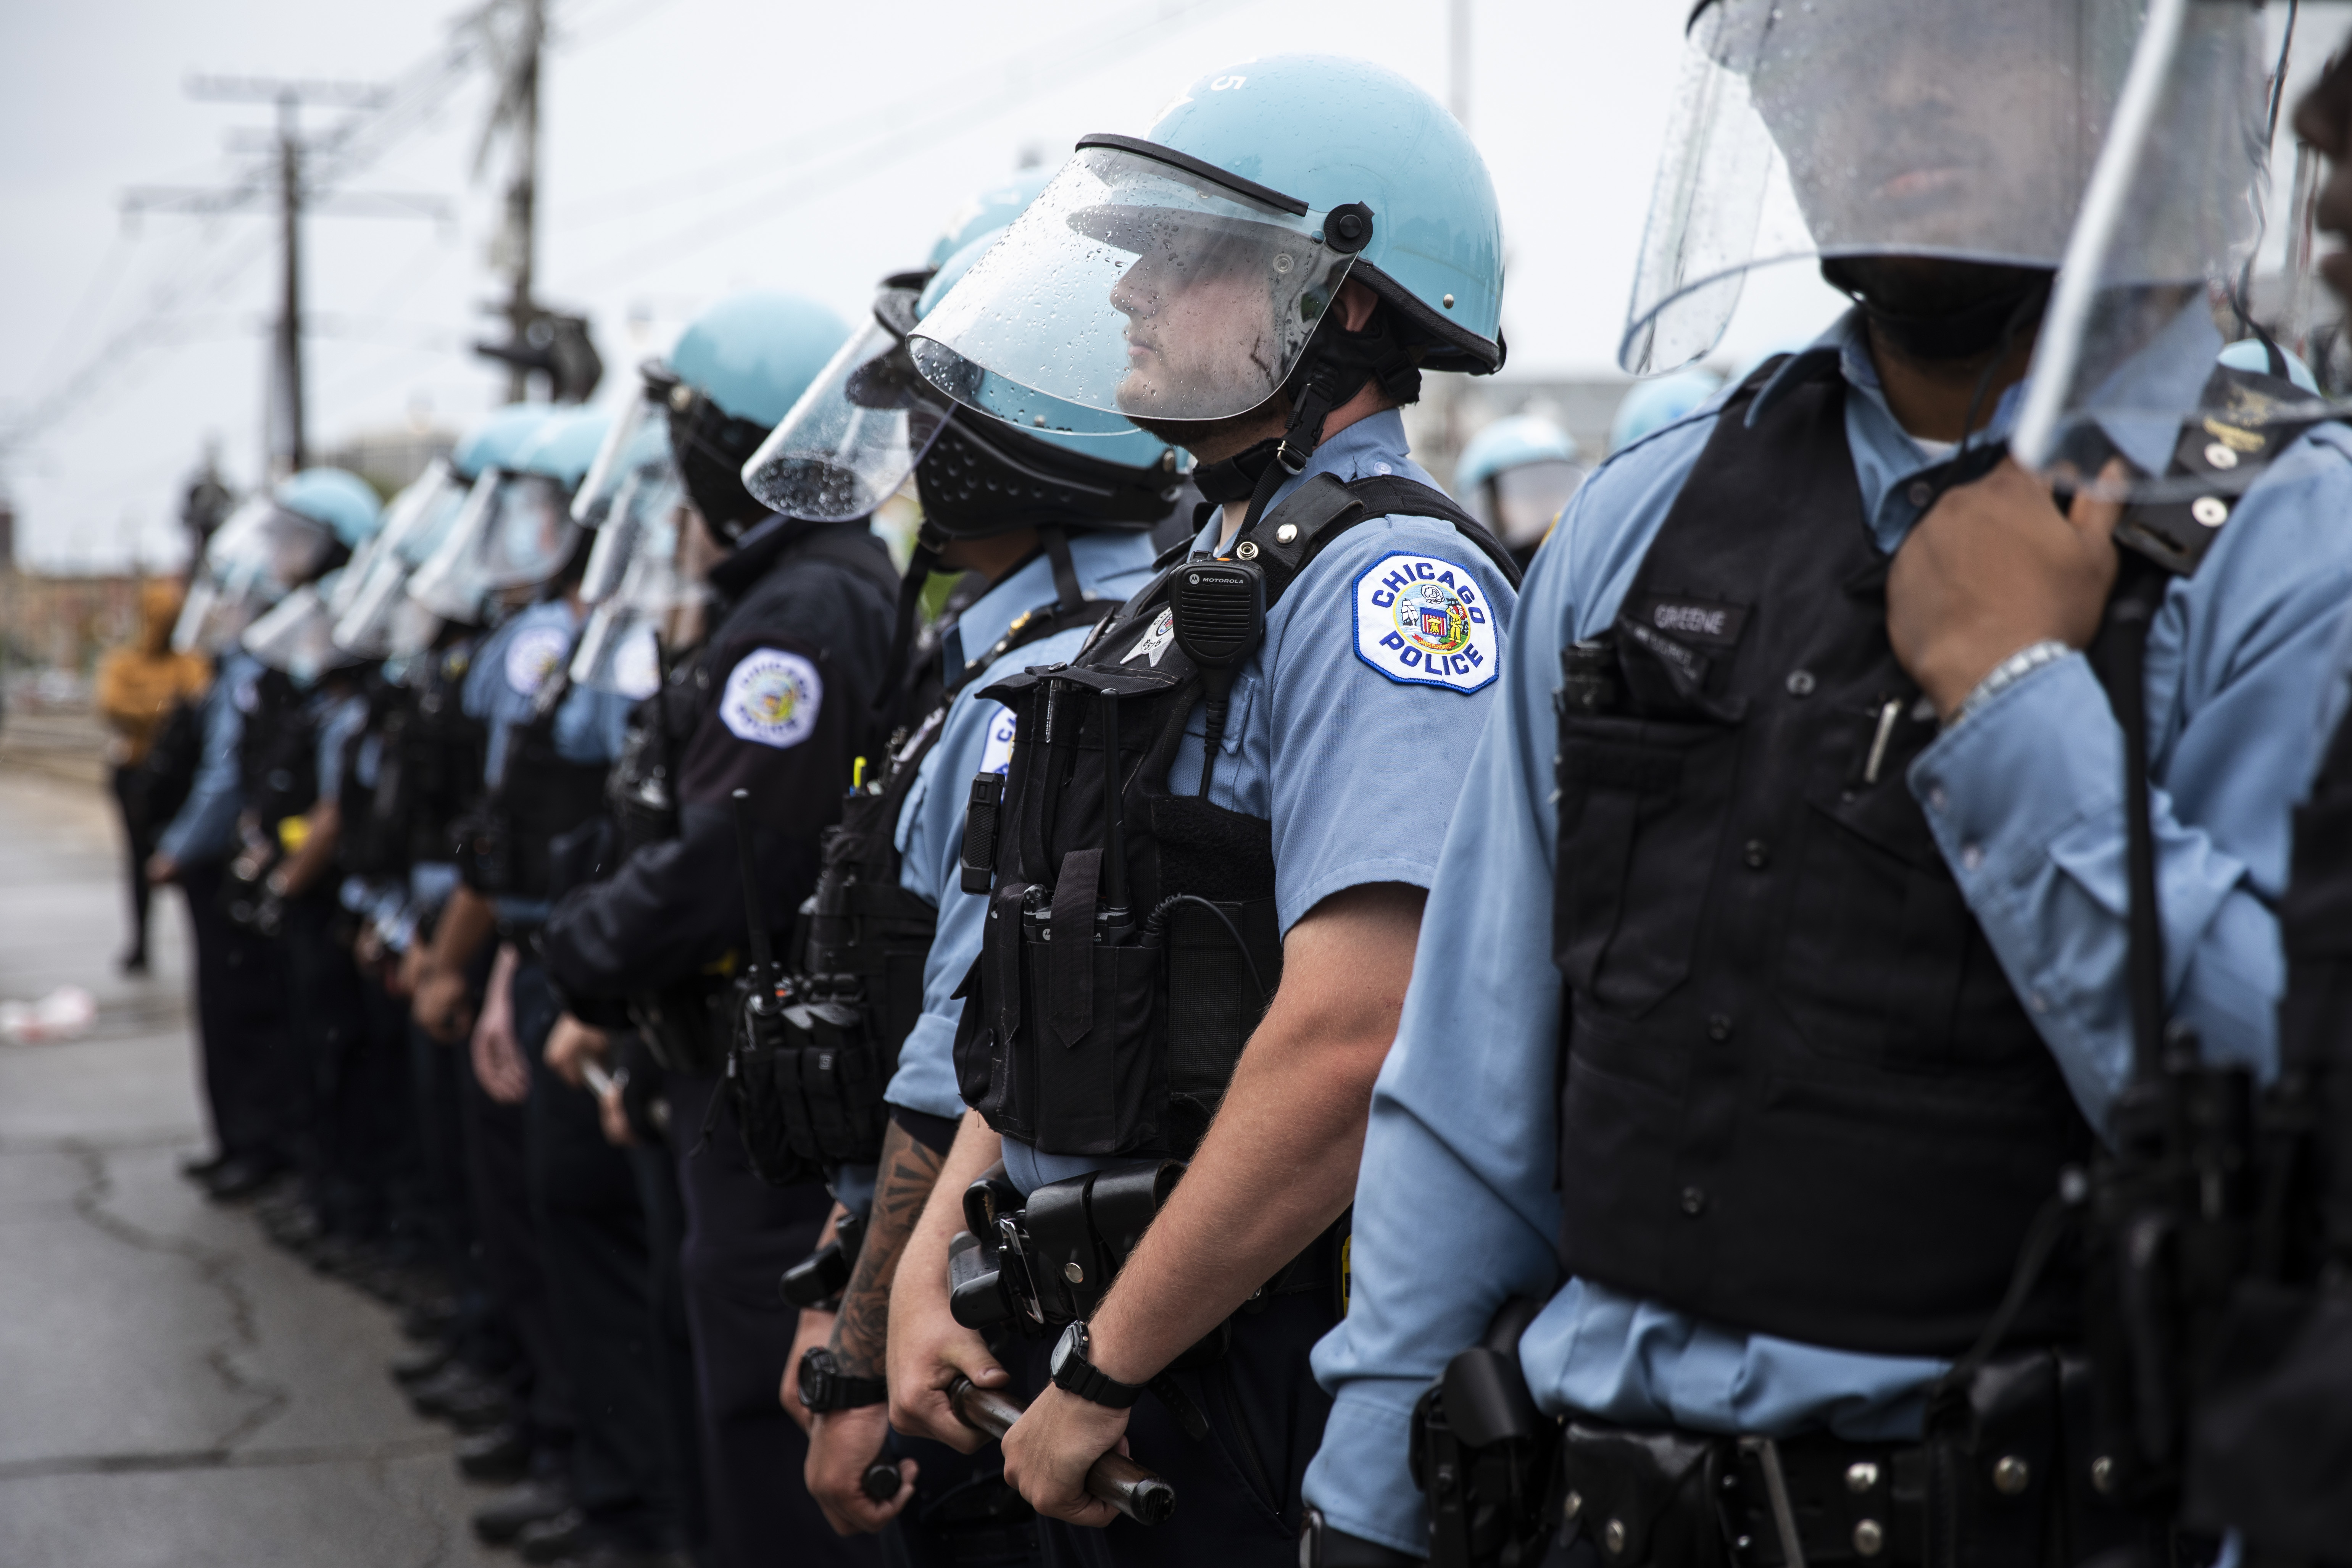 These Chicago police officers were on duty near East 71st Street and South Chappel Avenue in South Shore on Monday, June 1, 2020 after a weekend of protests, riots and looting throughout the city.